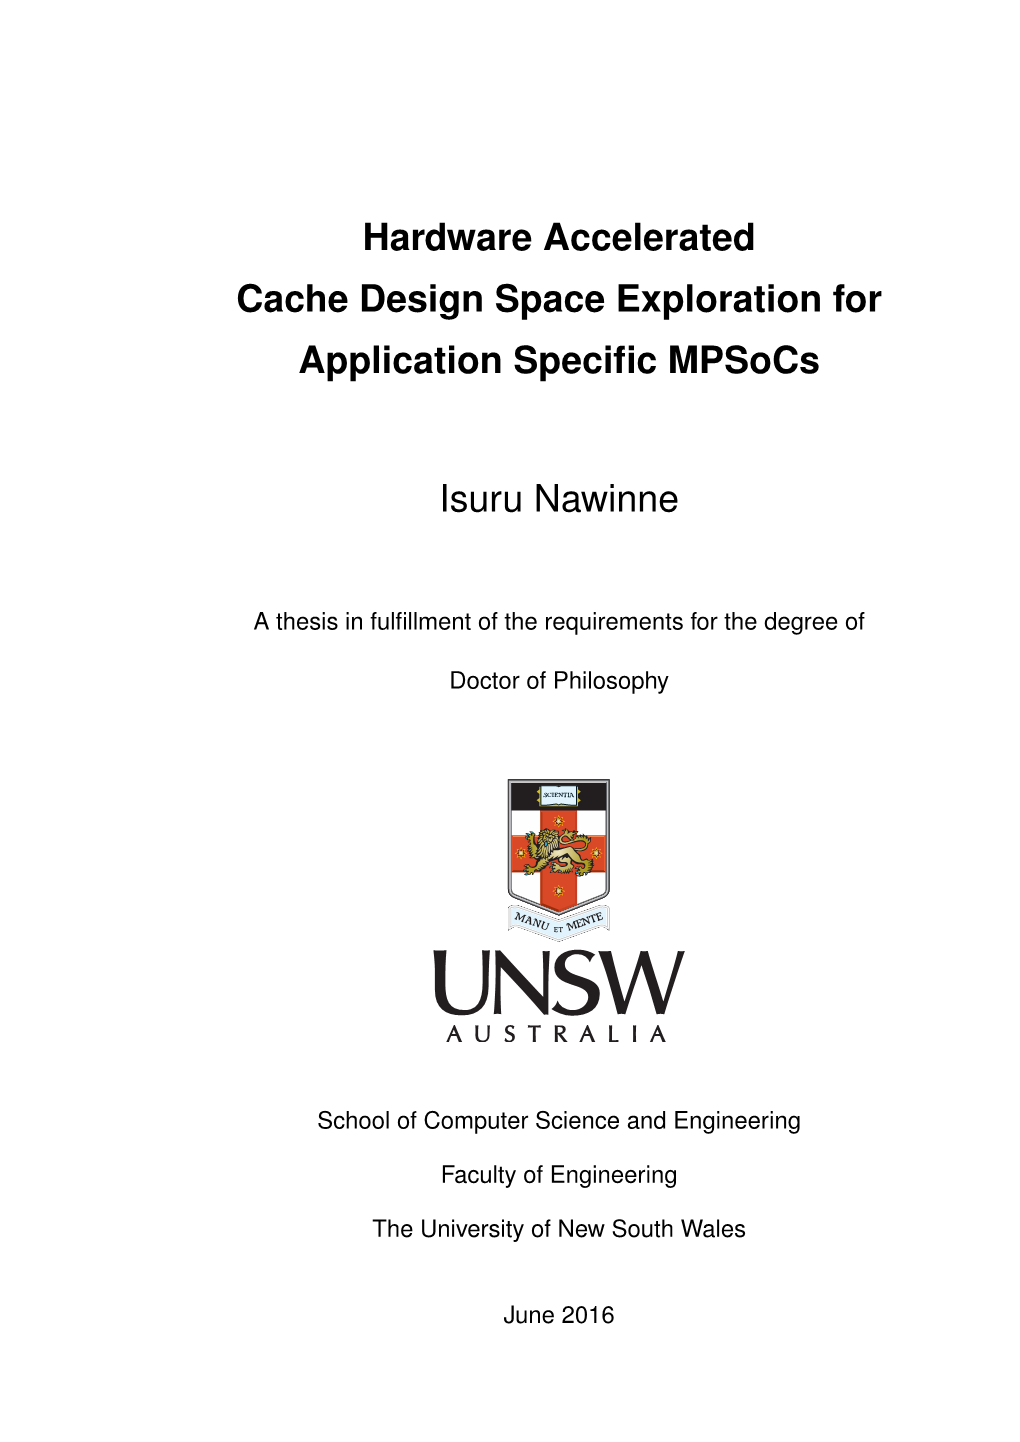 Hardware Accelerated Cache Design Space Exploration for Application Speciﬁc Mpsocs